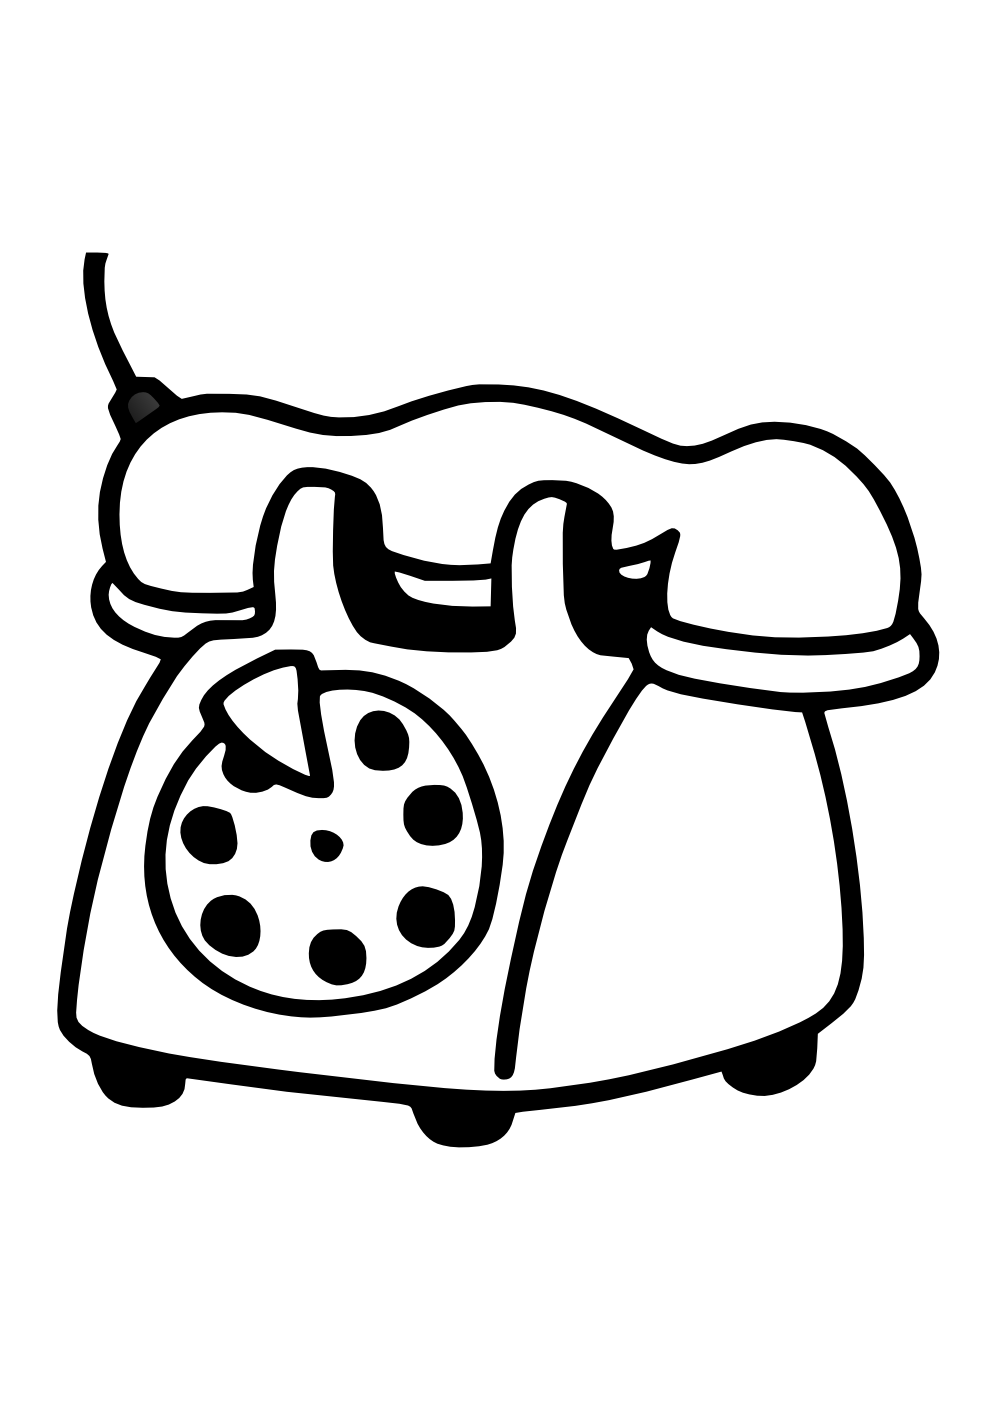 Clipart telephone black and white